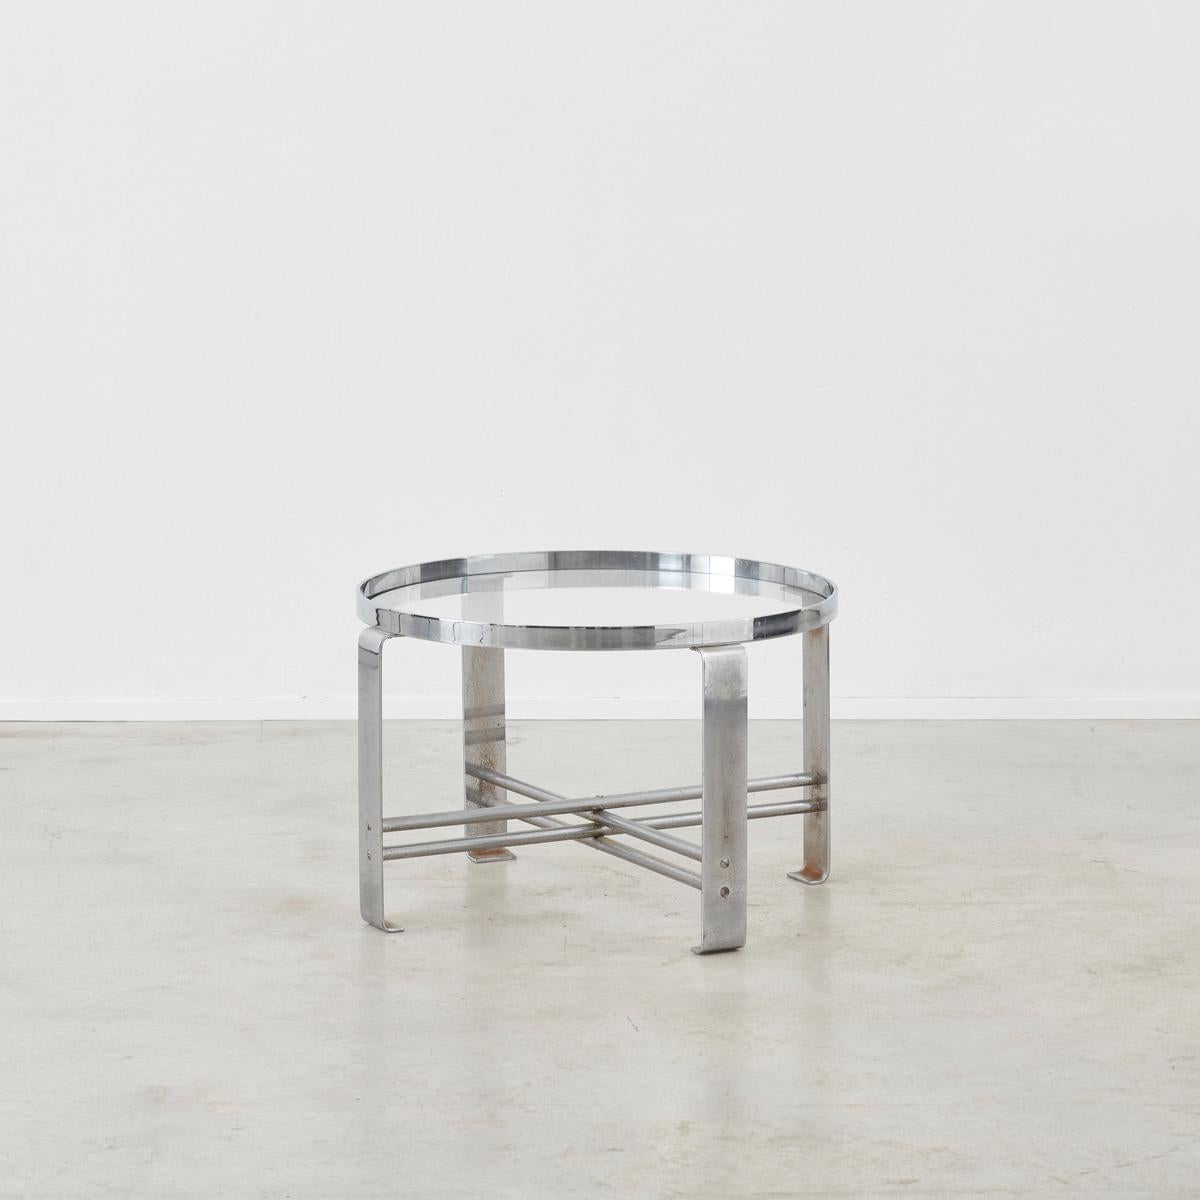 Wolgang Hoffmann (1900–1969), son of Josef Hoffman. Began working for the Howell Co in the 1930s, a company, of which he eventually became a resident designer. This coffee table combines tubular and flat steel, functional sculpture at it’s best. The